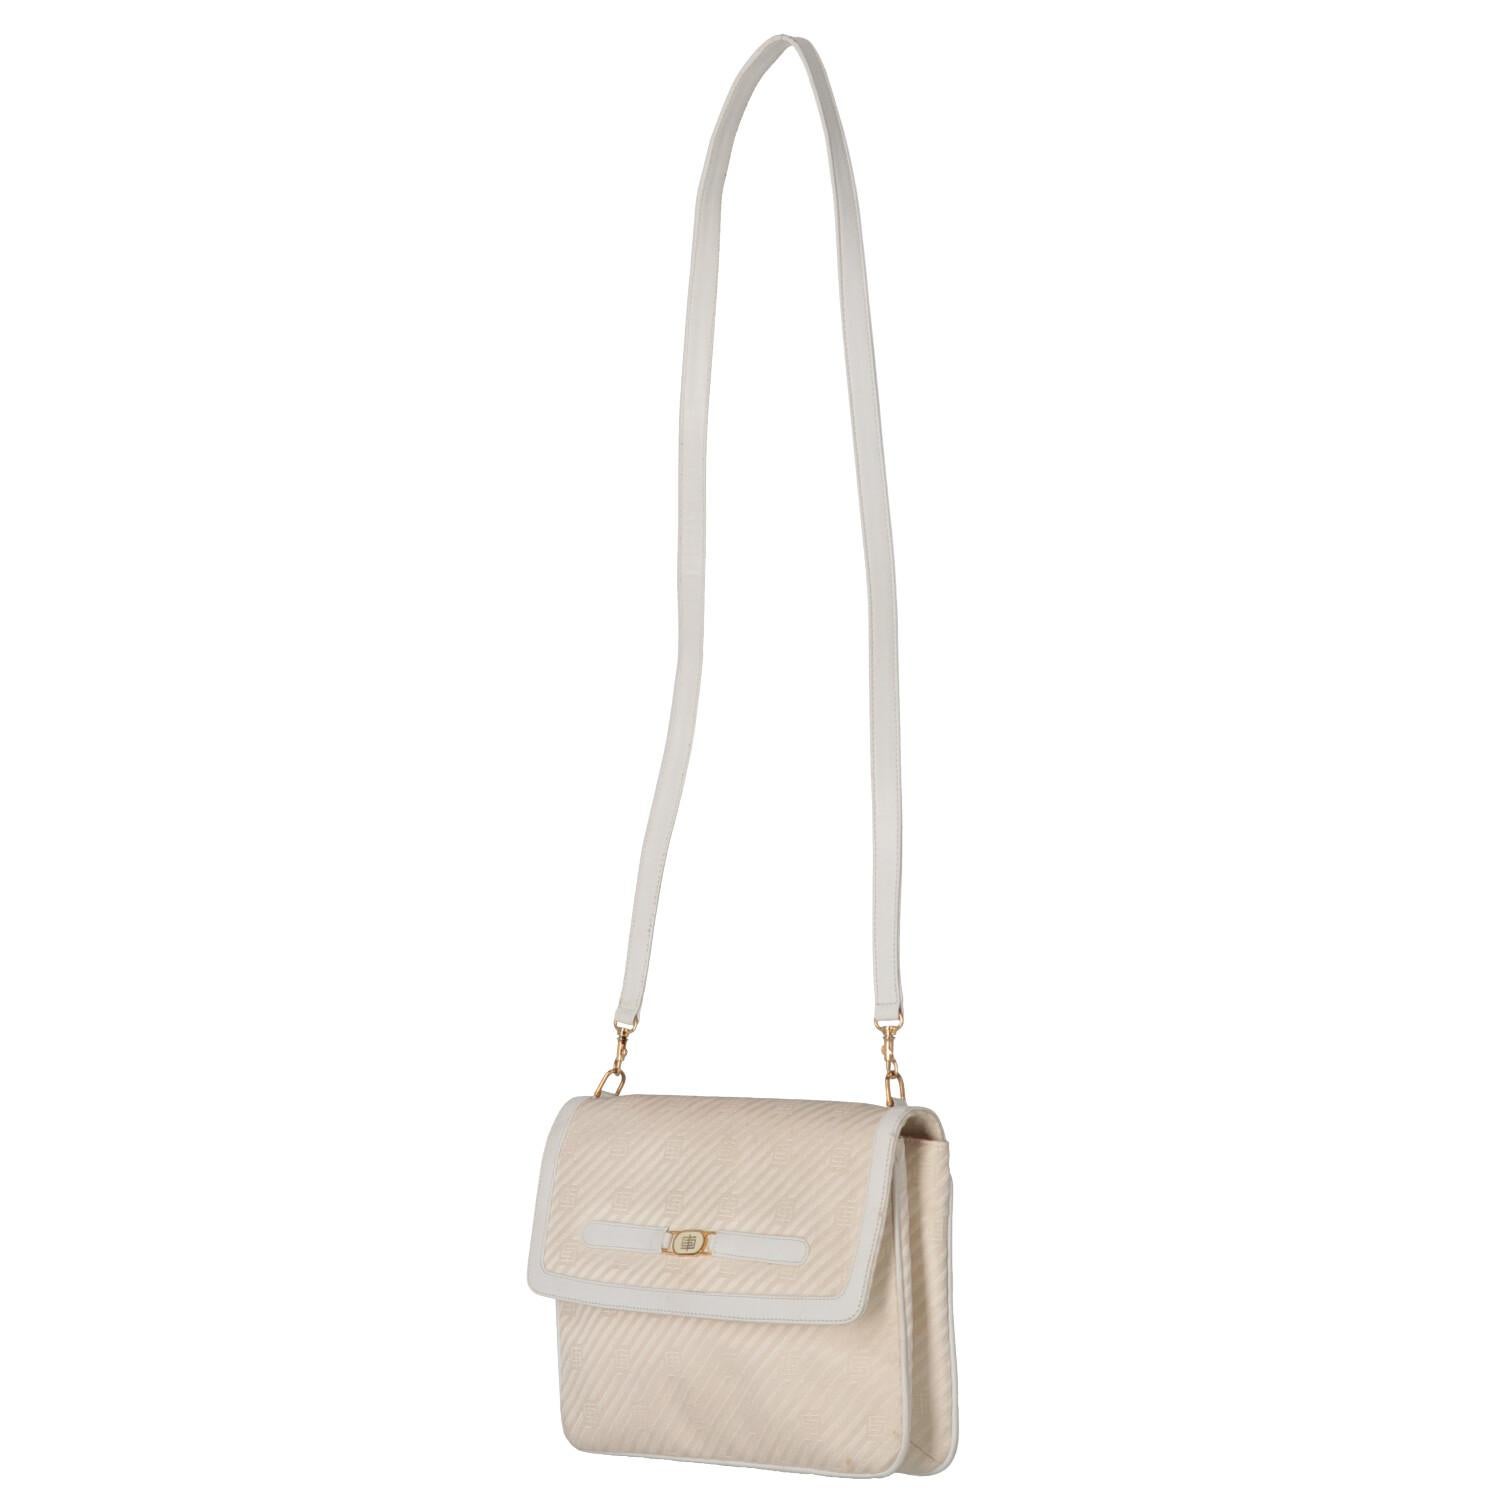 Emilio Pucci white jacquard fabric shoulder bag with leather edges and shoulder strap. Front flap with hidden button, leather lining and patch pockets.

Height: 20 cm
Width: 24 cm
Depth: 4 cm
Shoulder strap lenght: 110 cm

Product code: